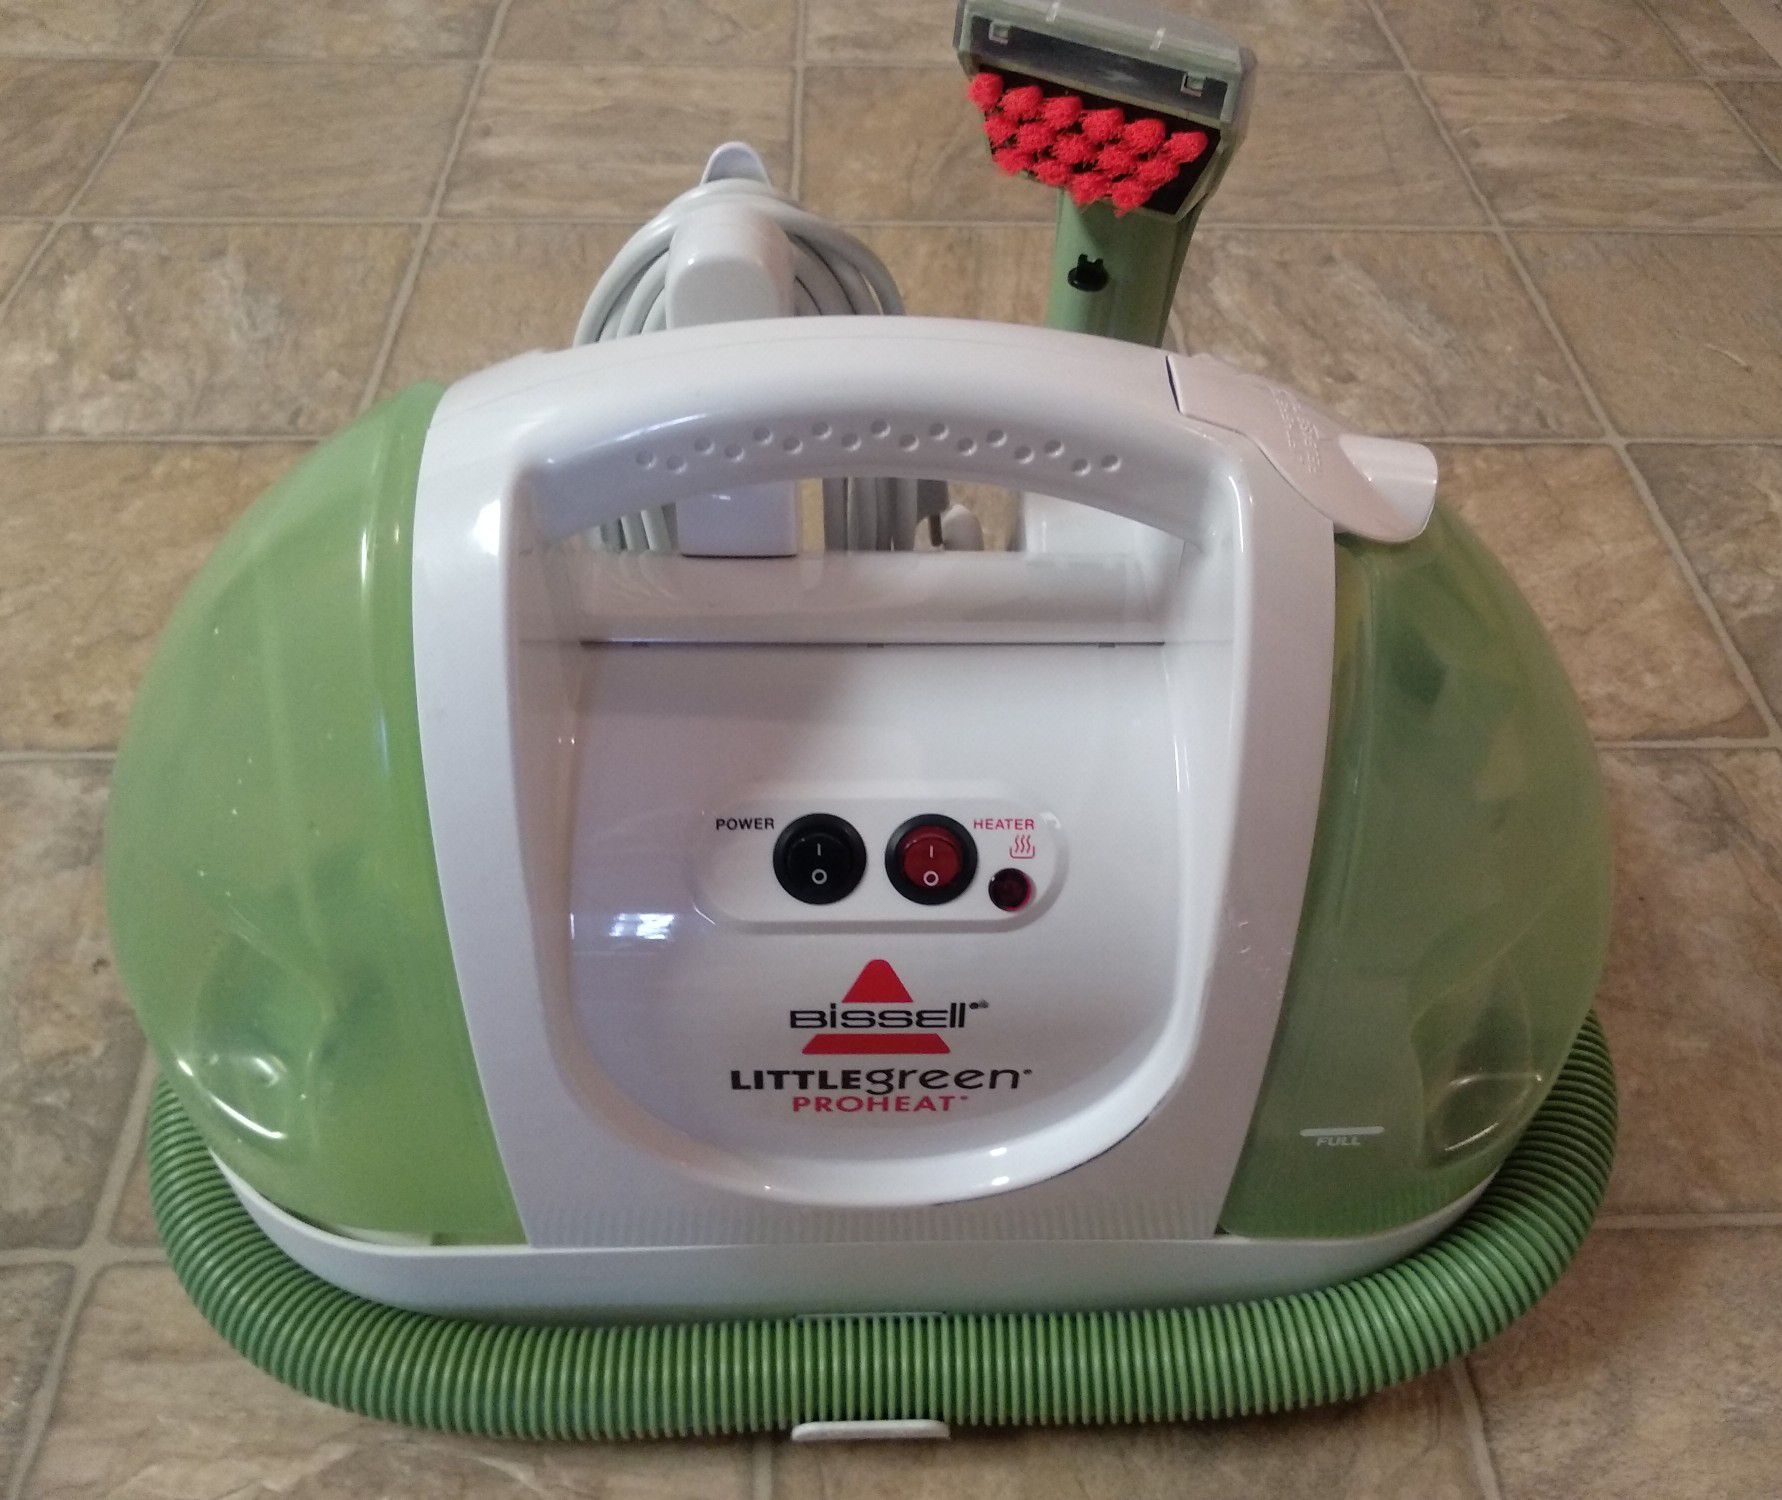 BISSELL Little Green ProHeat Portable Carpet and Upholstery Cleaner - Very new!